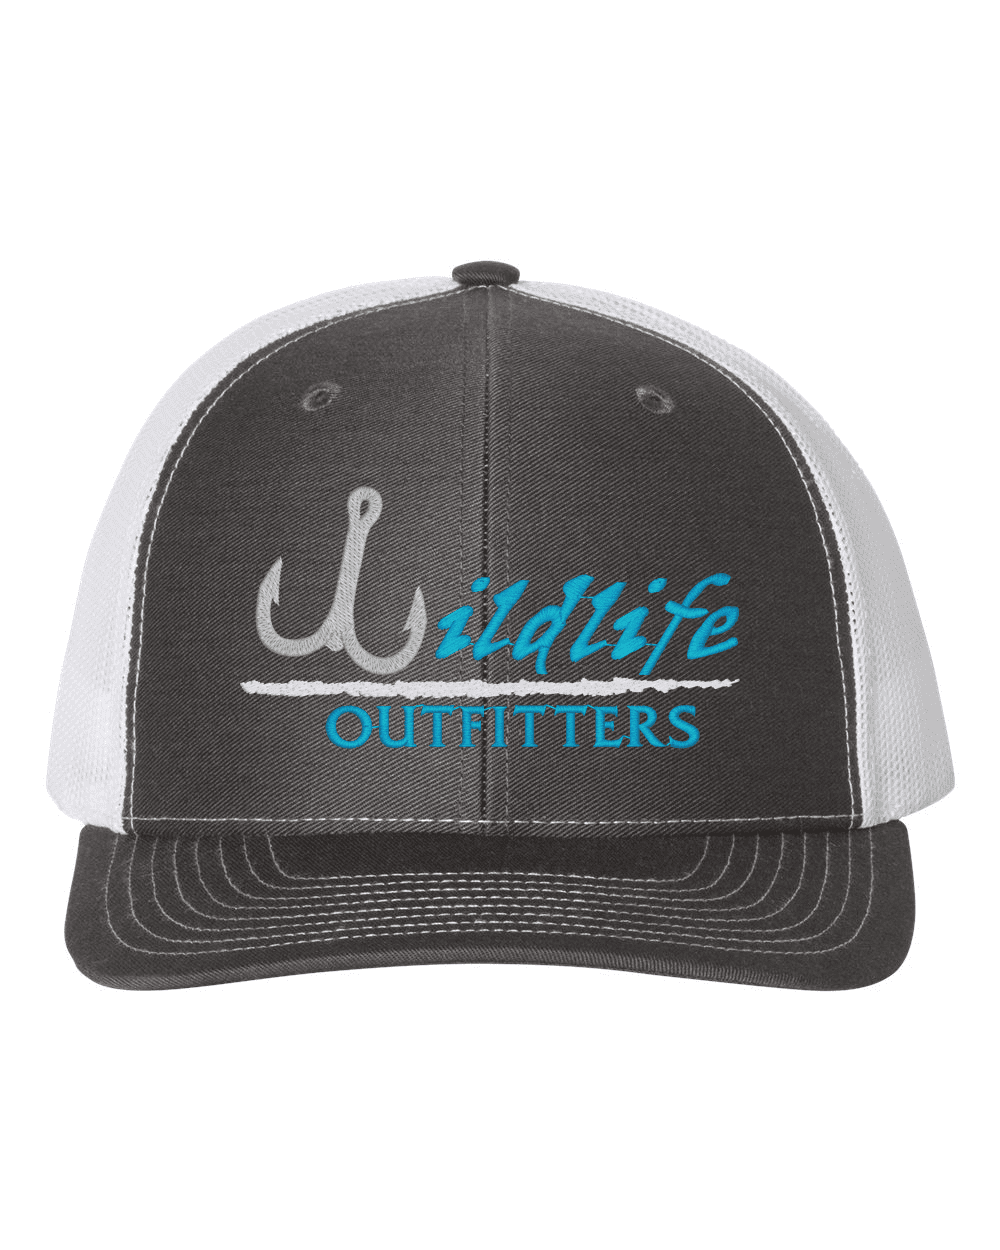 https://wildlifeoutfitters.com/wp-content/uploads/Charcoal-White-112-Noah.png